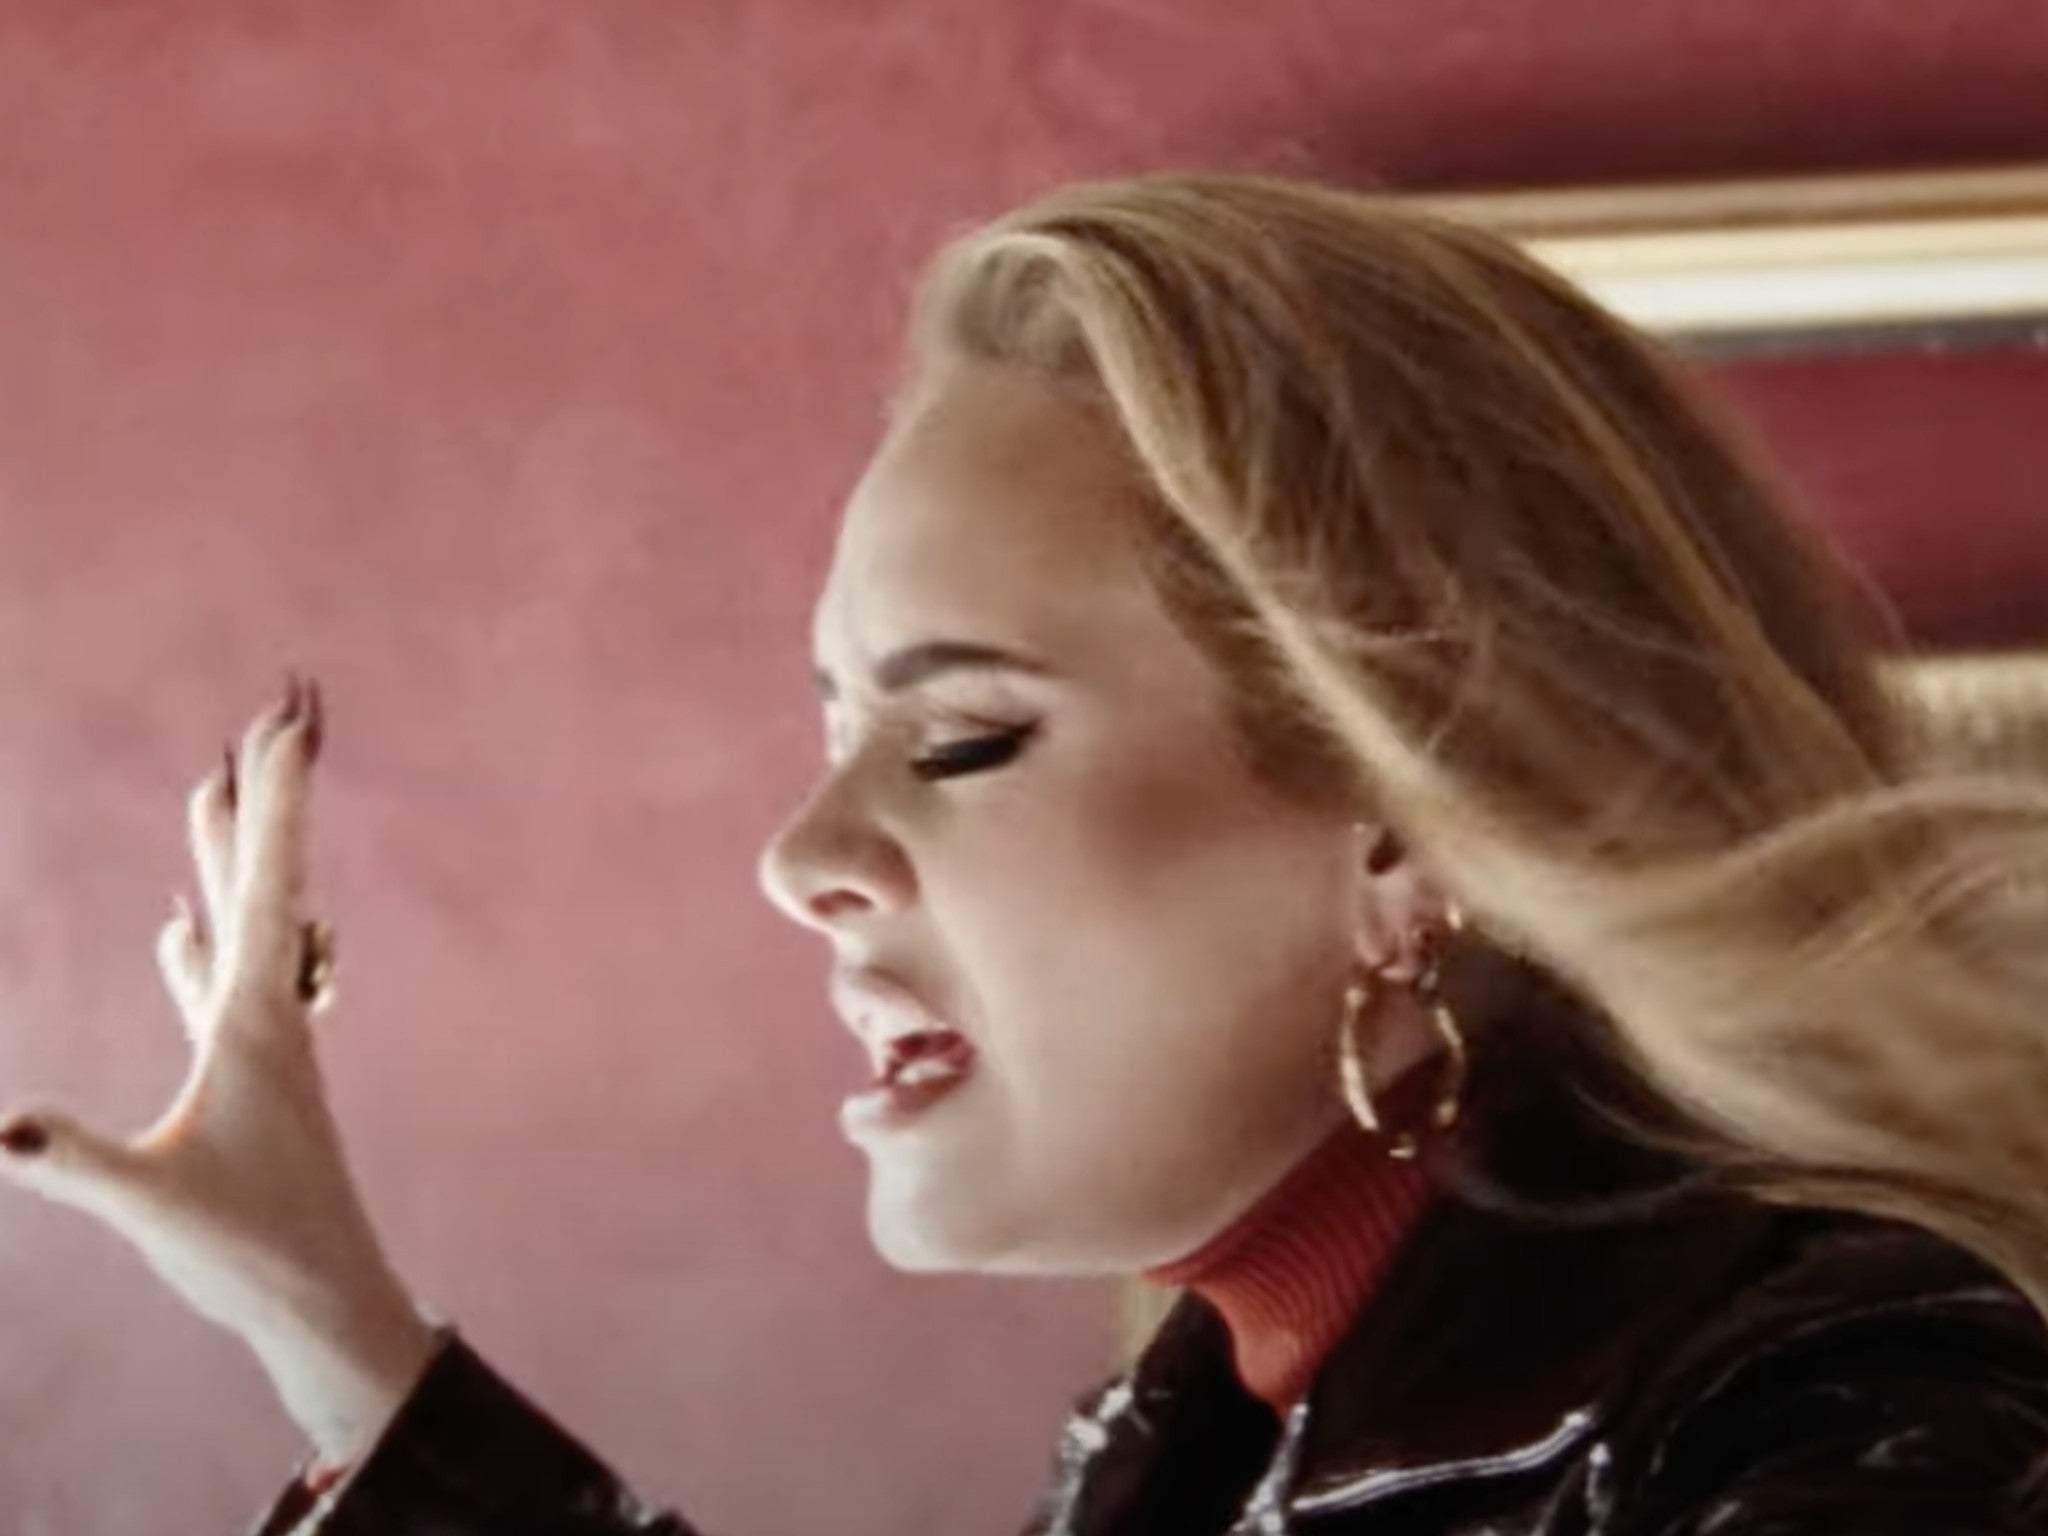 Adele’s new song ‘Easy On Me’ has arrived